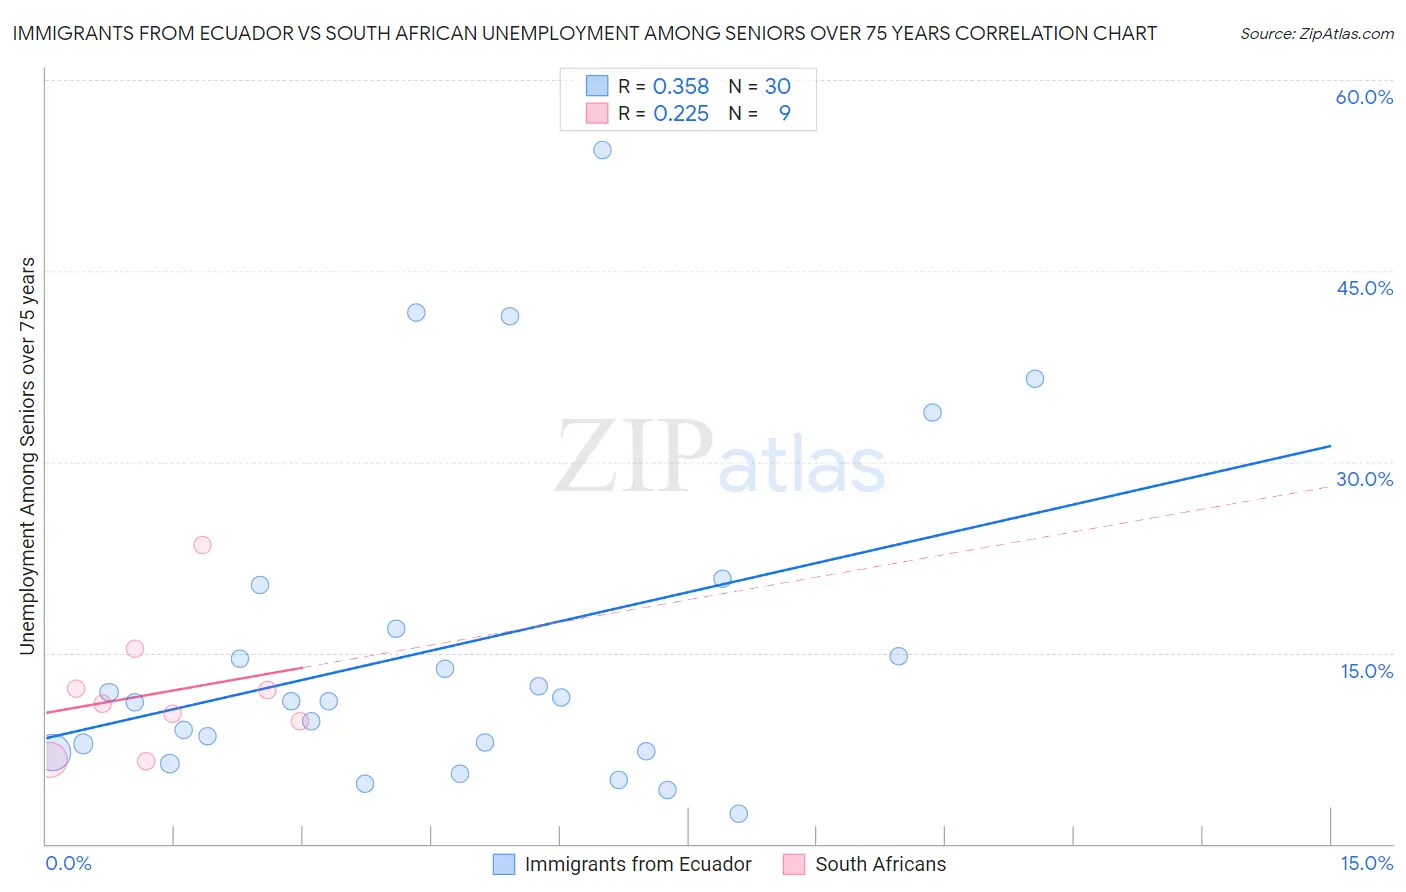 Immigrants from Ecuador vs South African Unemployment Among Seniors over 75 years